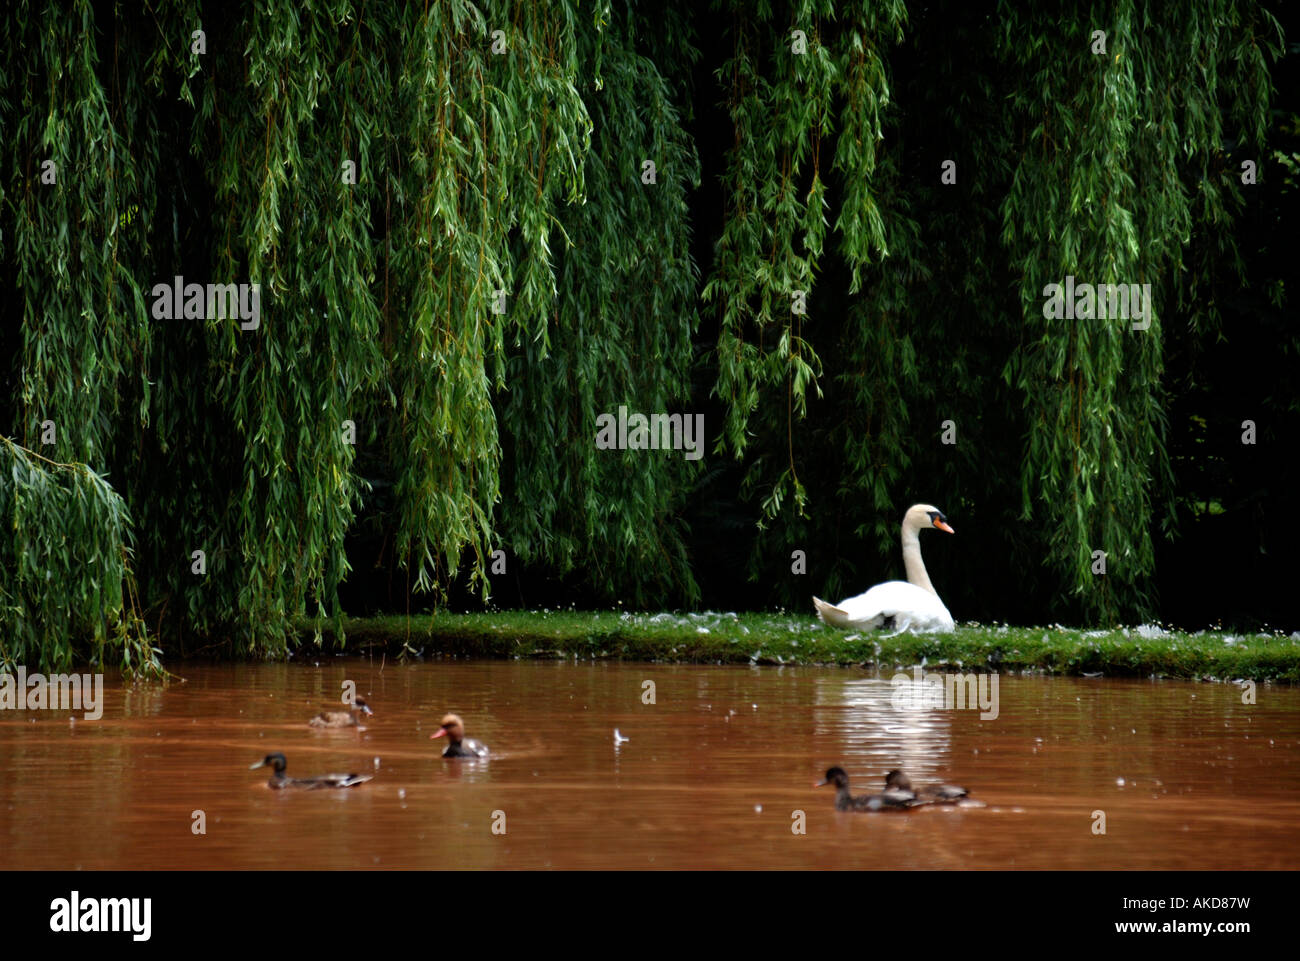 A SWAN NESTING ON AN ISLAND OF A LAKE WITH A WEEPING WILLOW TREE HEREFORDSHIRE UK Stock Photo